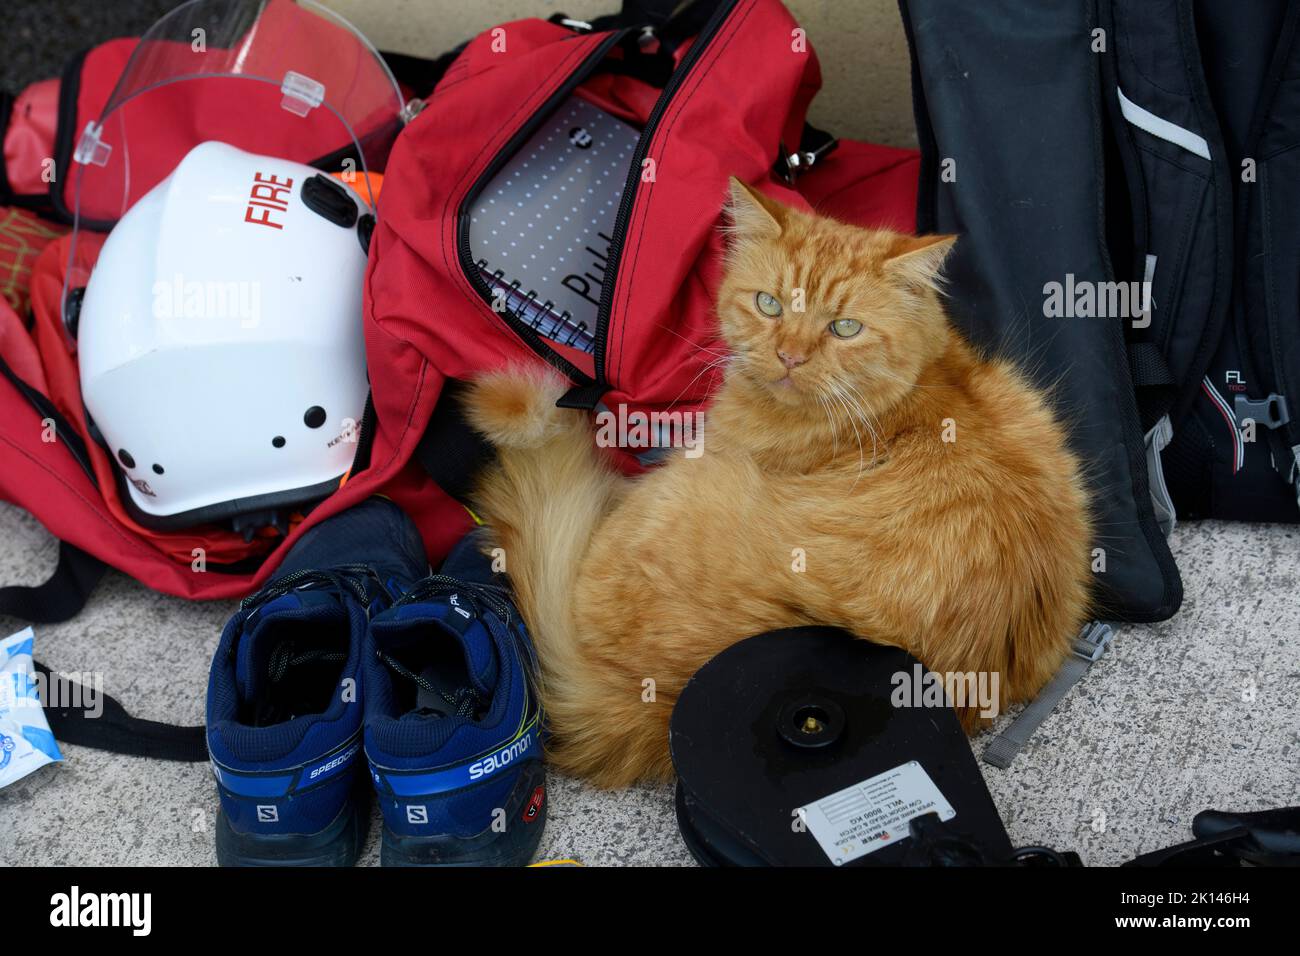 A fire station cat during a training day, UK Stock Photo